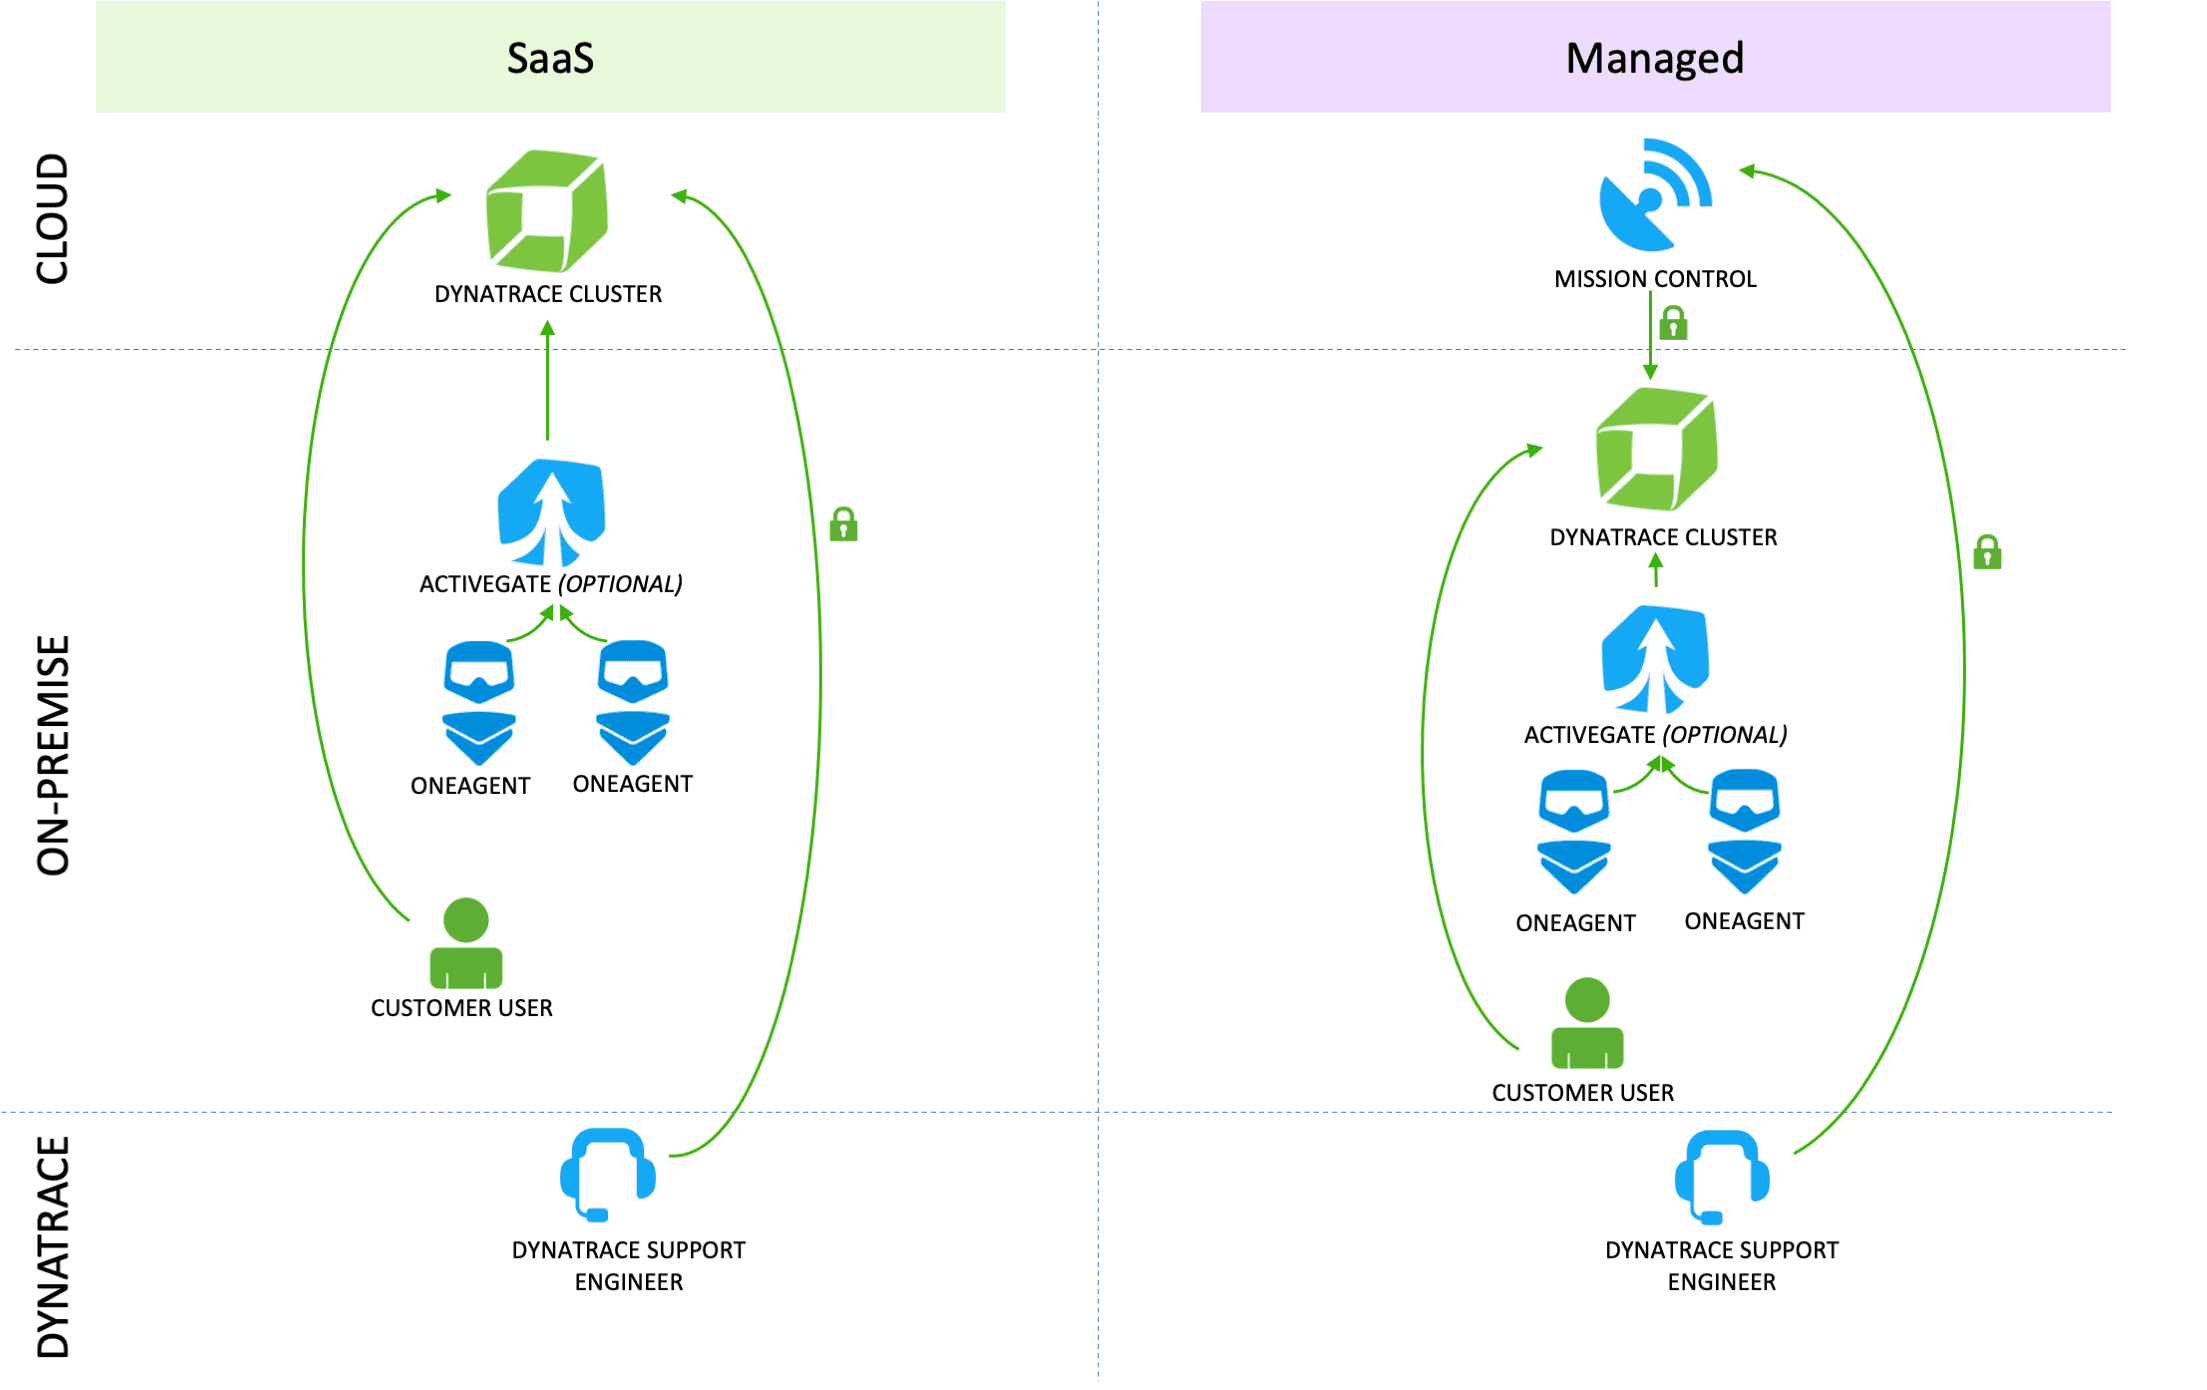 Data access for Dynatrace support